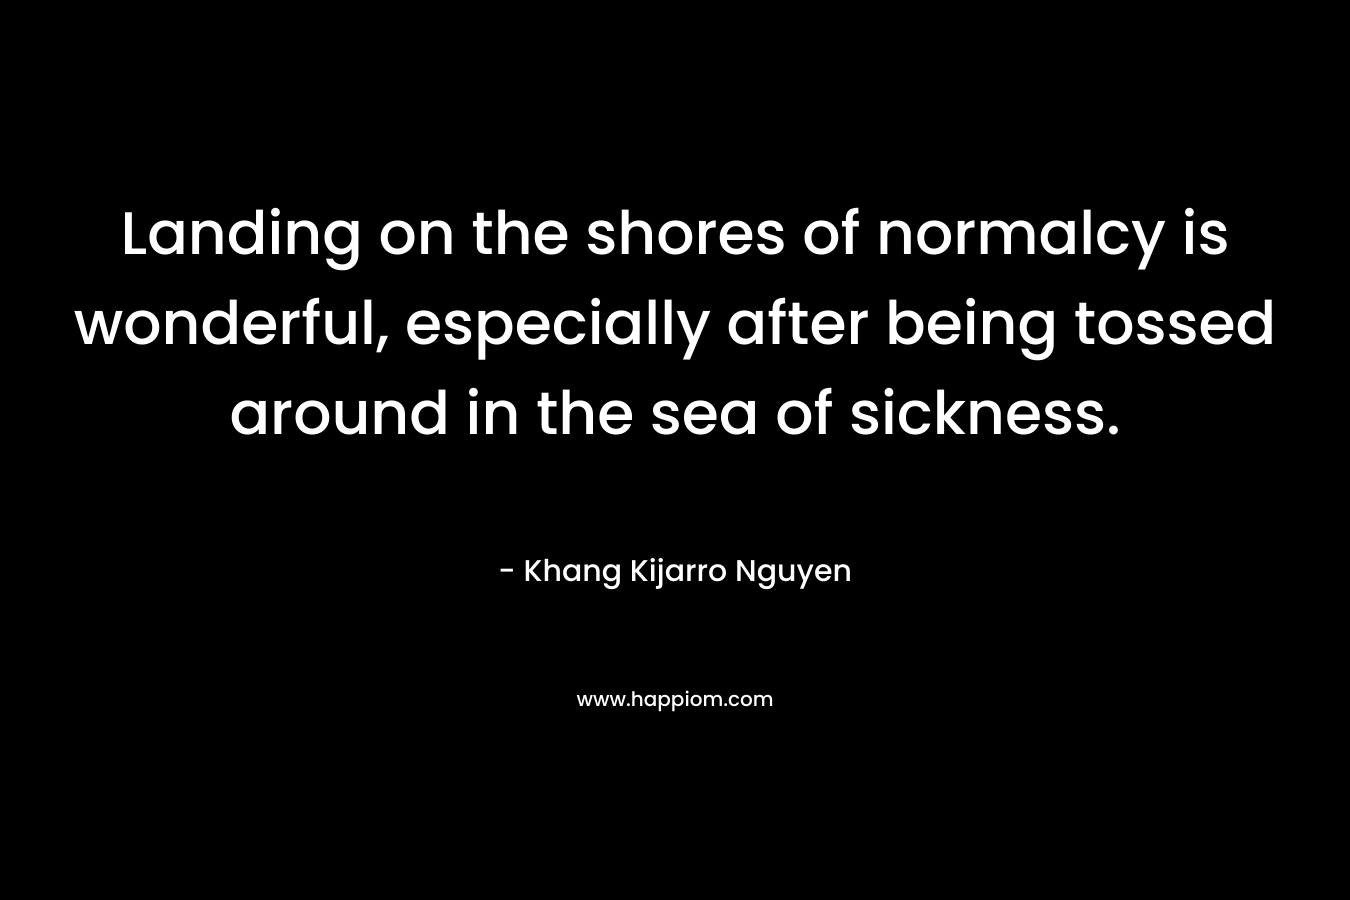 Landing on the shores of normalcy is wonderful, especially after being tossed around in the sea of sickness.